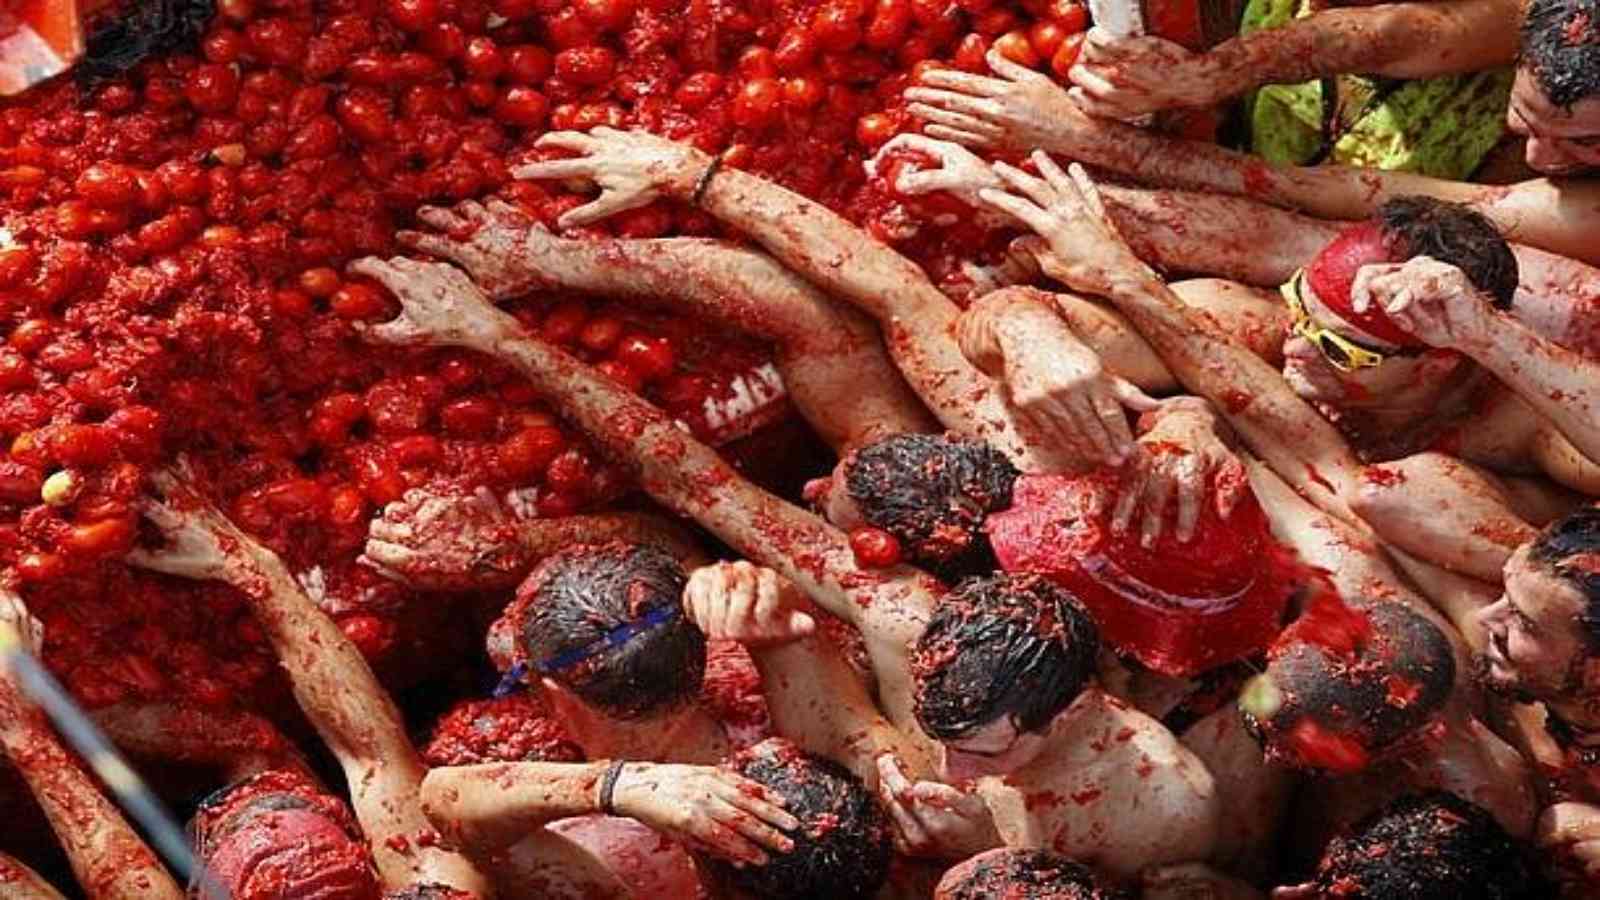 La Tomatina 2022: Date, History and Significance